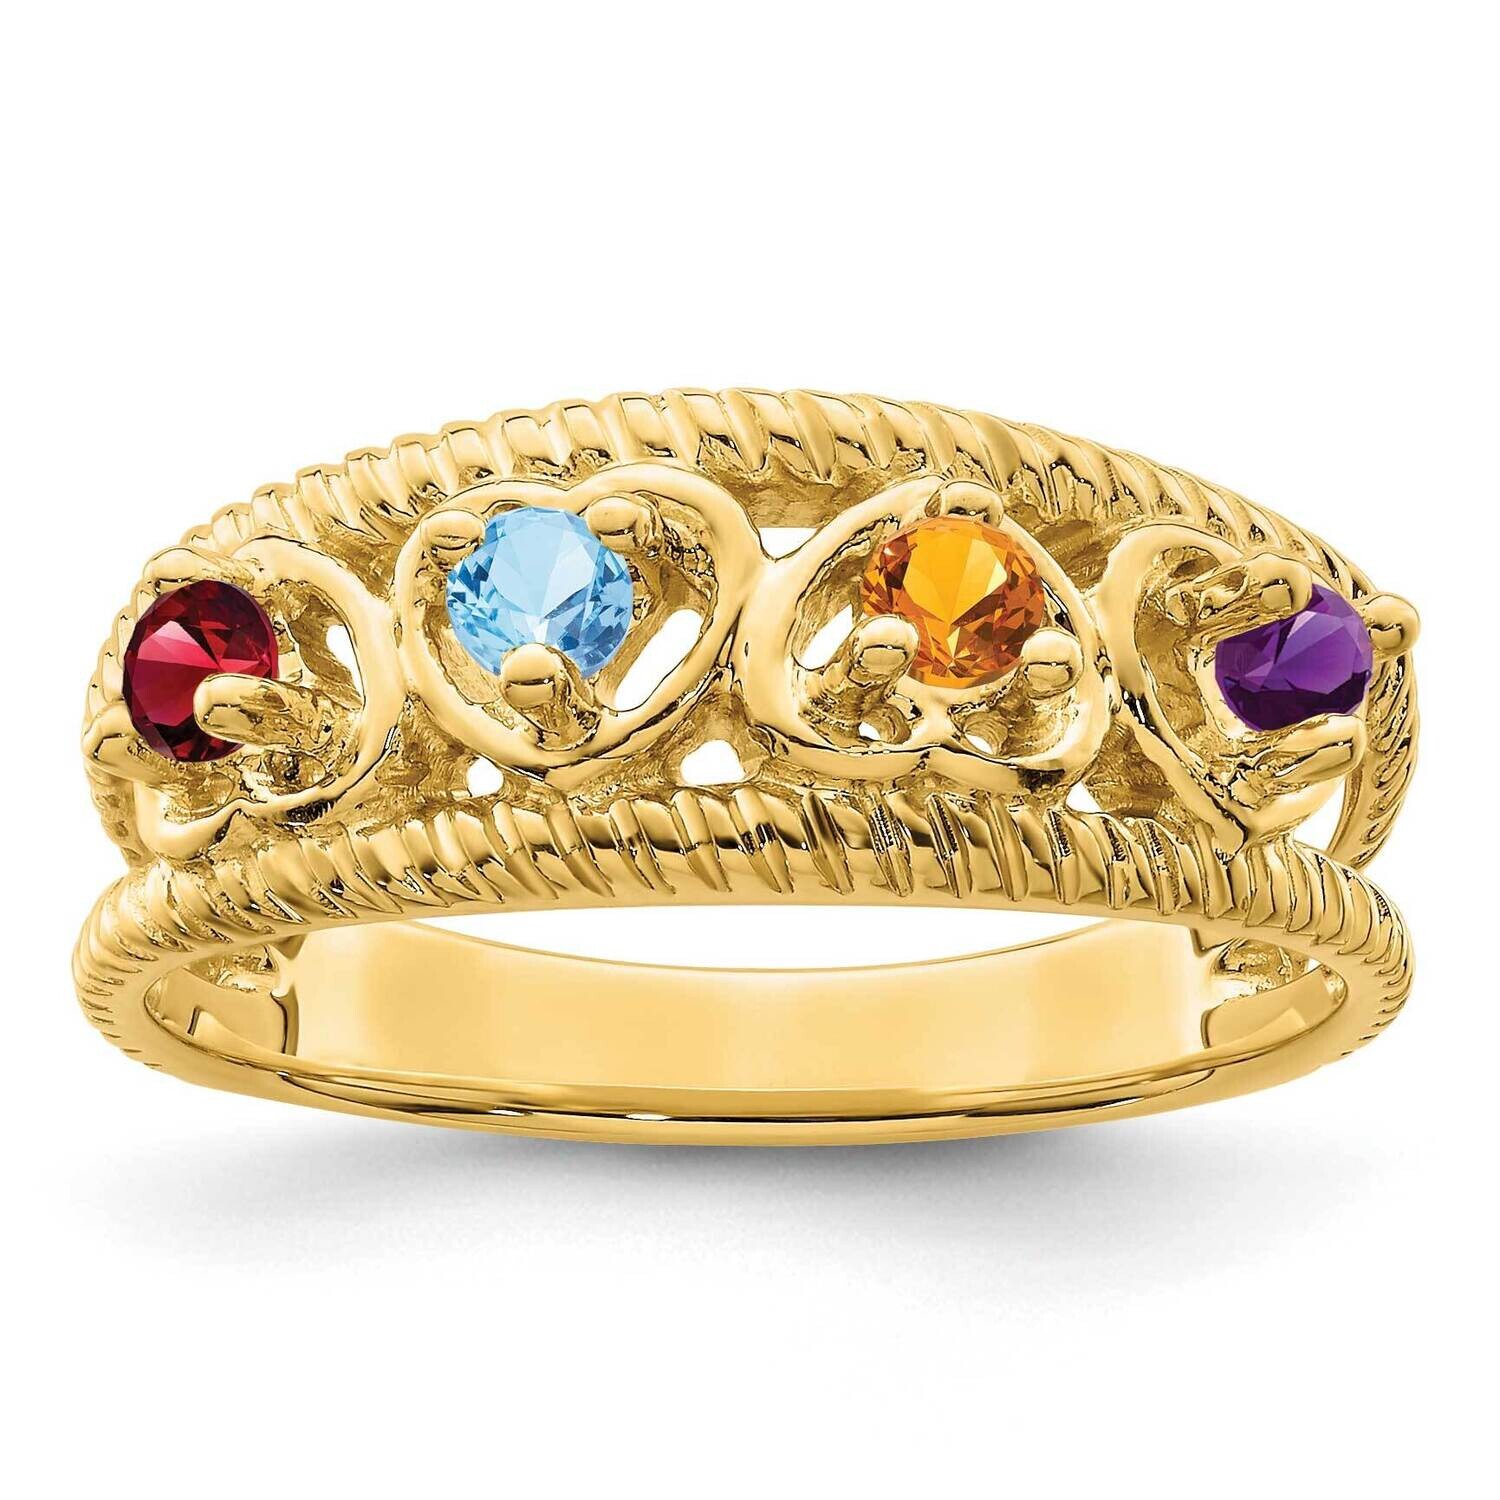 Family Jewelry Ring Mounting 14k Gold XMR65_4